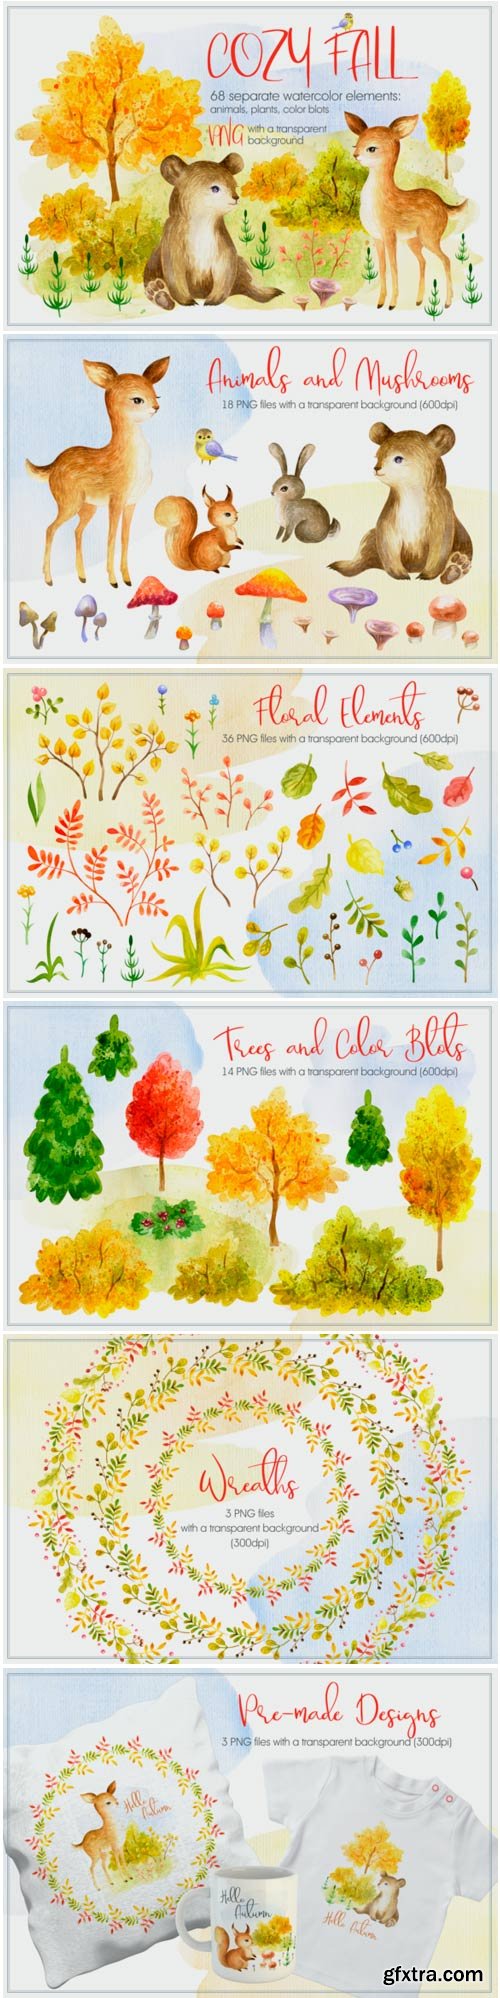 Cozy Fall. Watercolor Animals and Plants 1733493